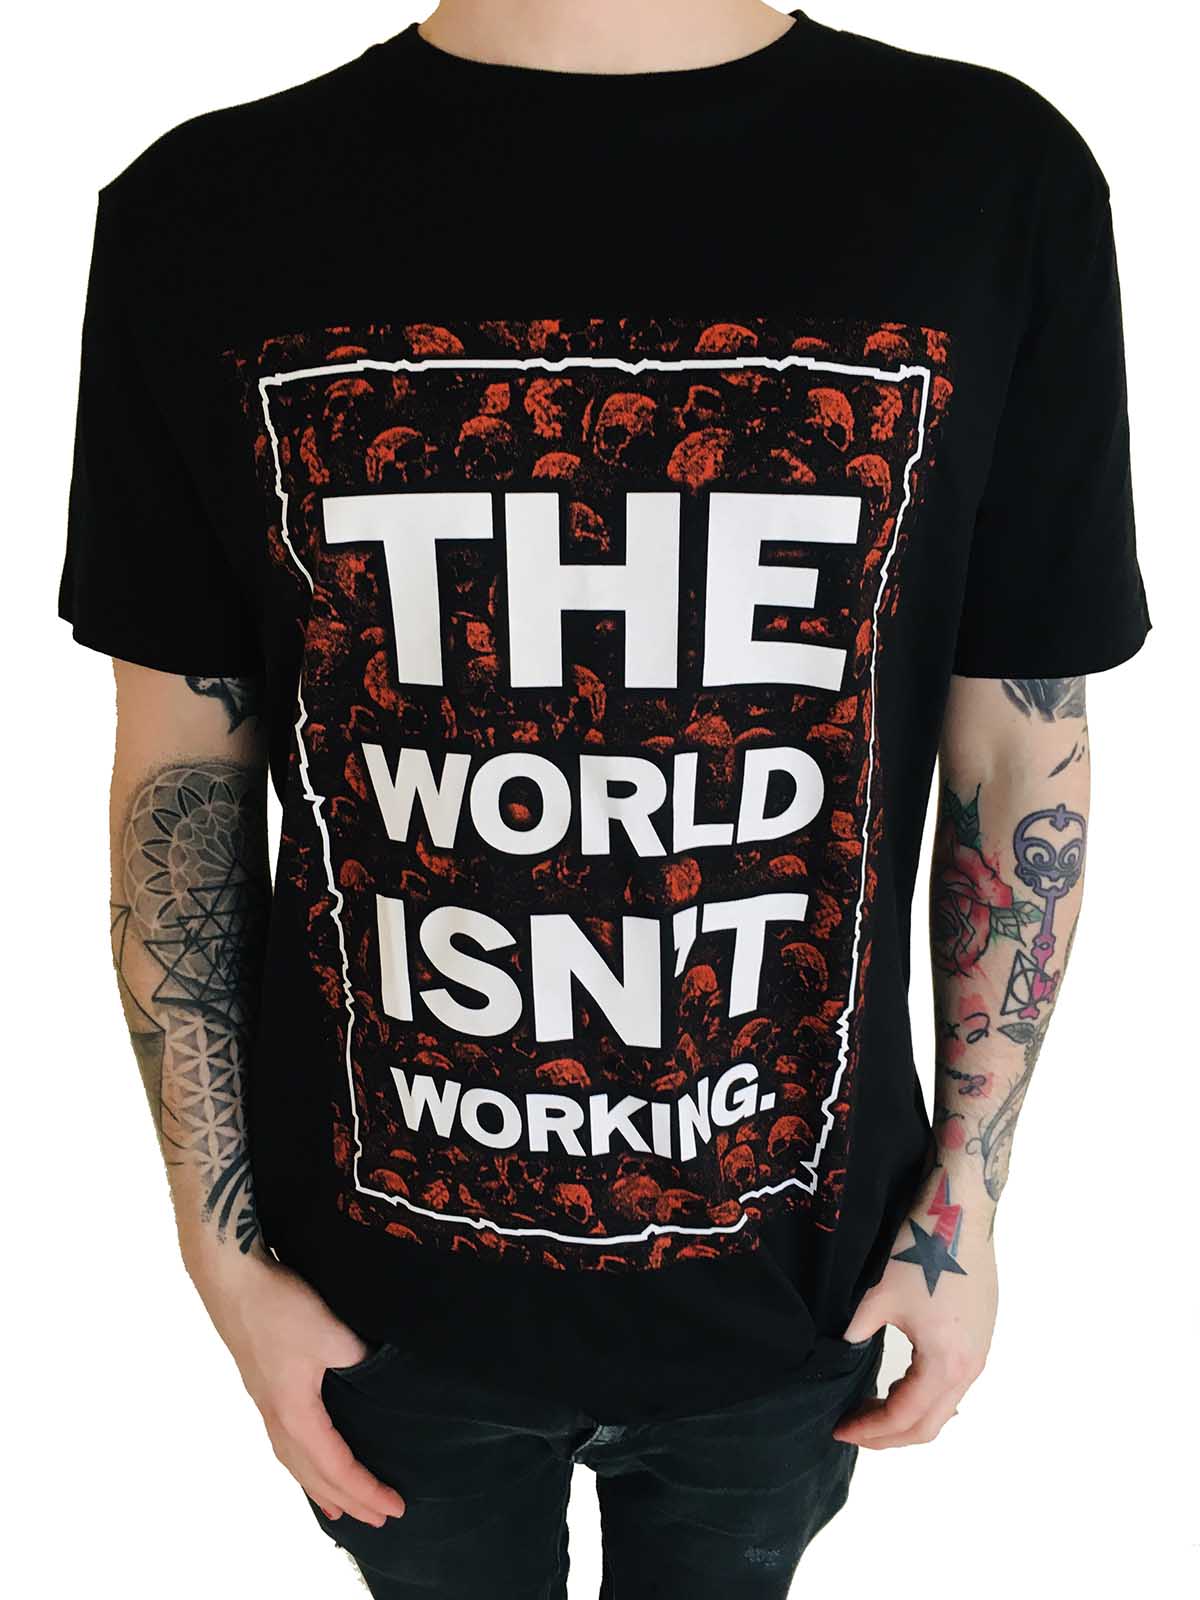 Earache "The World Isn't Working - Red Skull" Earth Positive T shirt designed by Mark Titchner